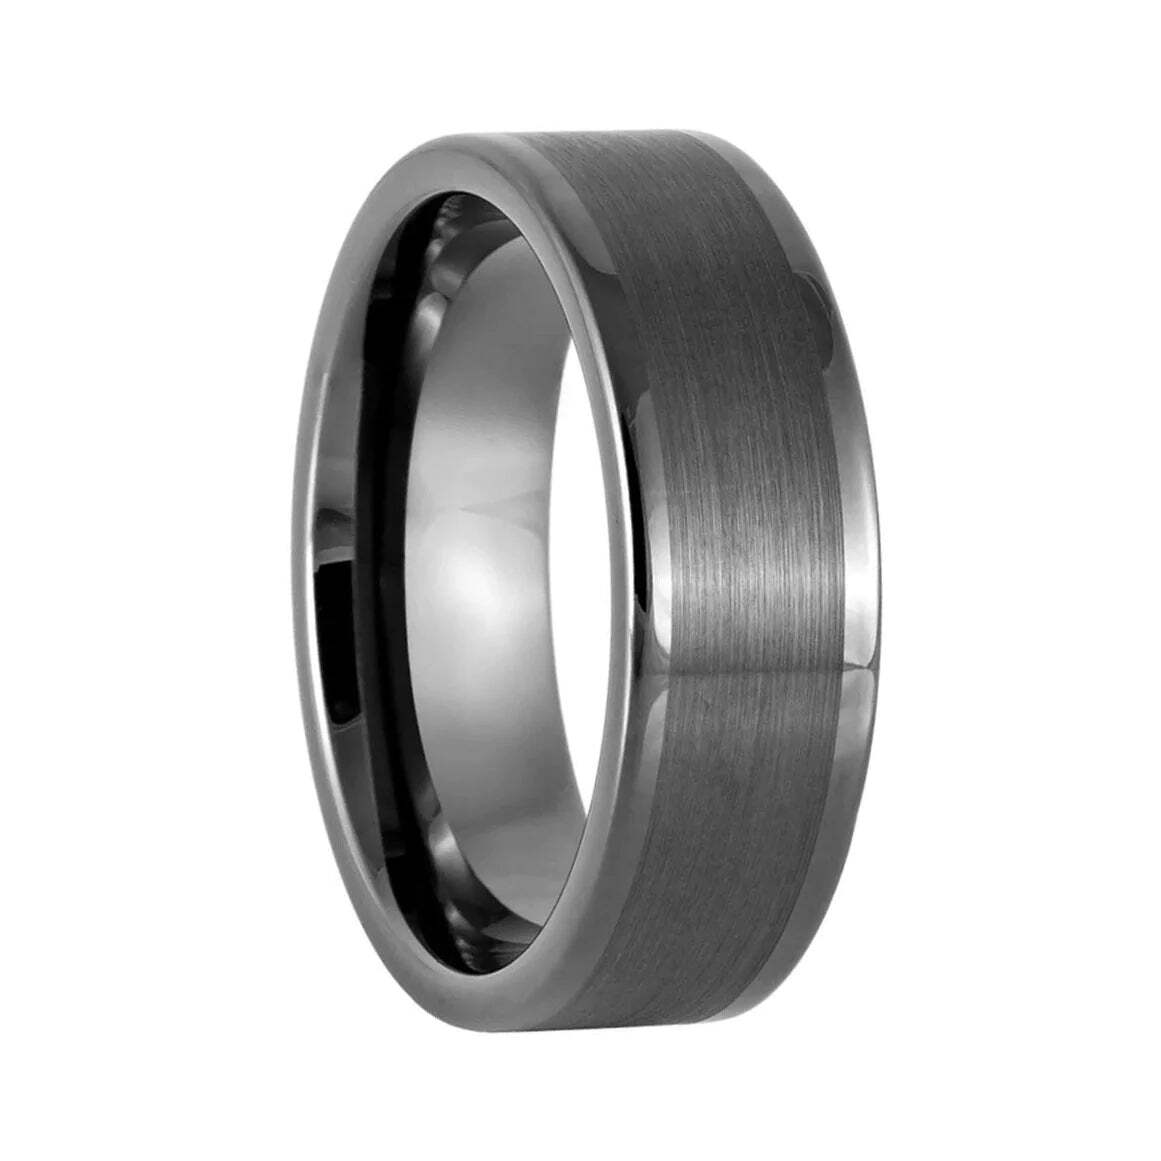 Brushed Gunmetal Gray Tungsten Men's Wedding Band with Polished Edges